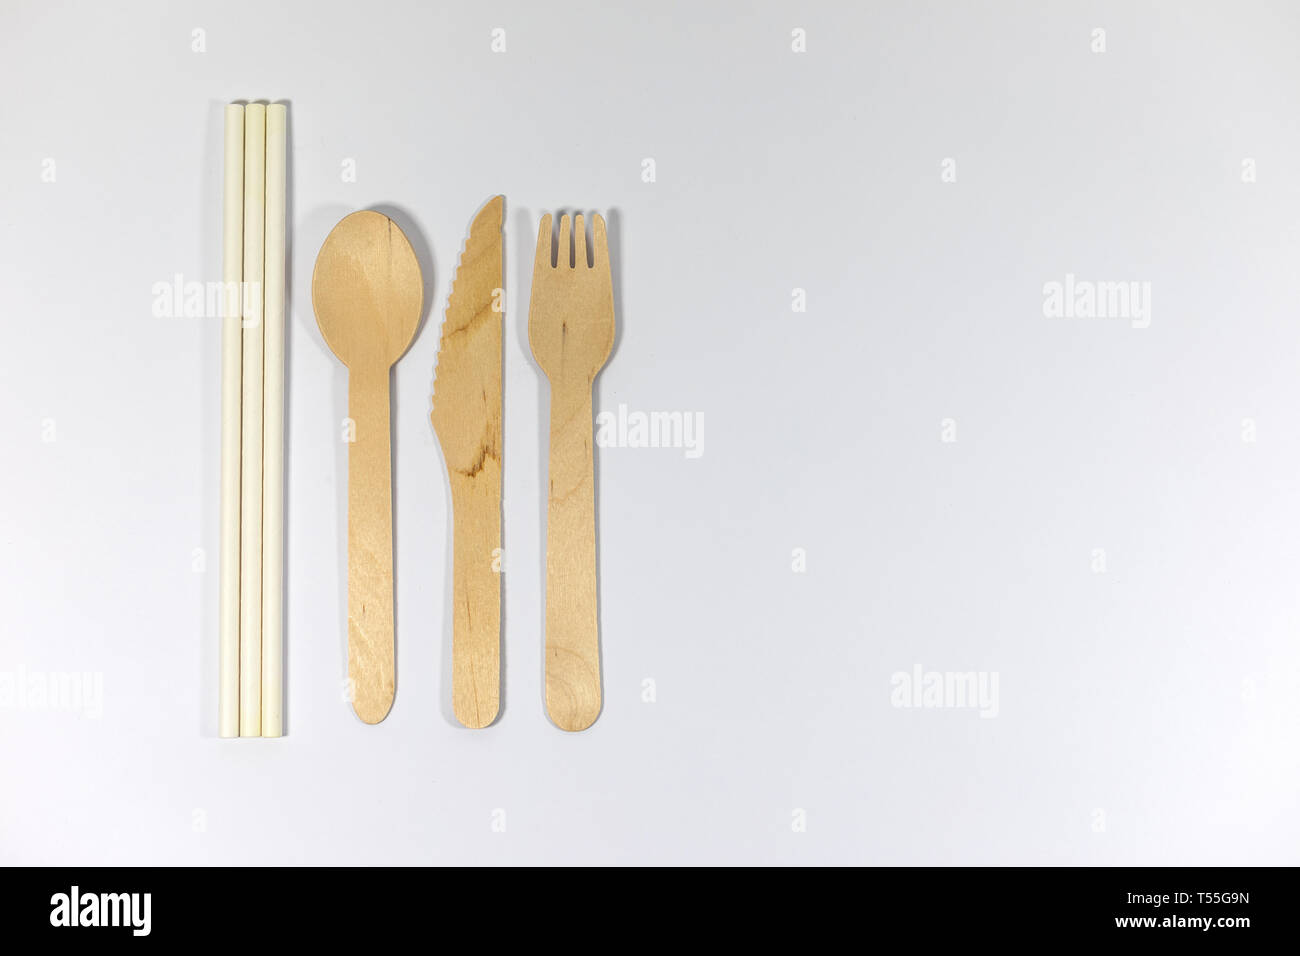 Ecofriendly Disposable Kitchen Utensils On A Beigegreen Background Wooden  Forks Spoons And Knives Ecology The Concept Of Zero Waste Stock Photo -  Download Image Now - iStock